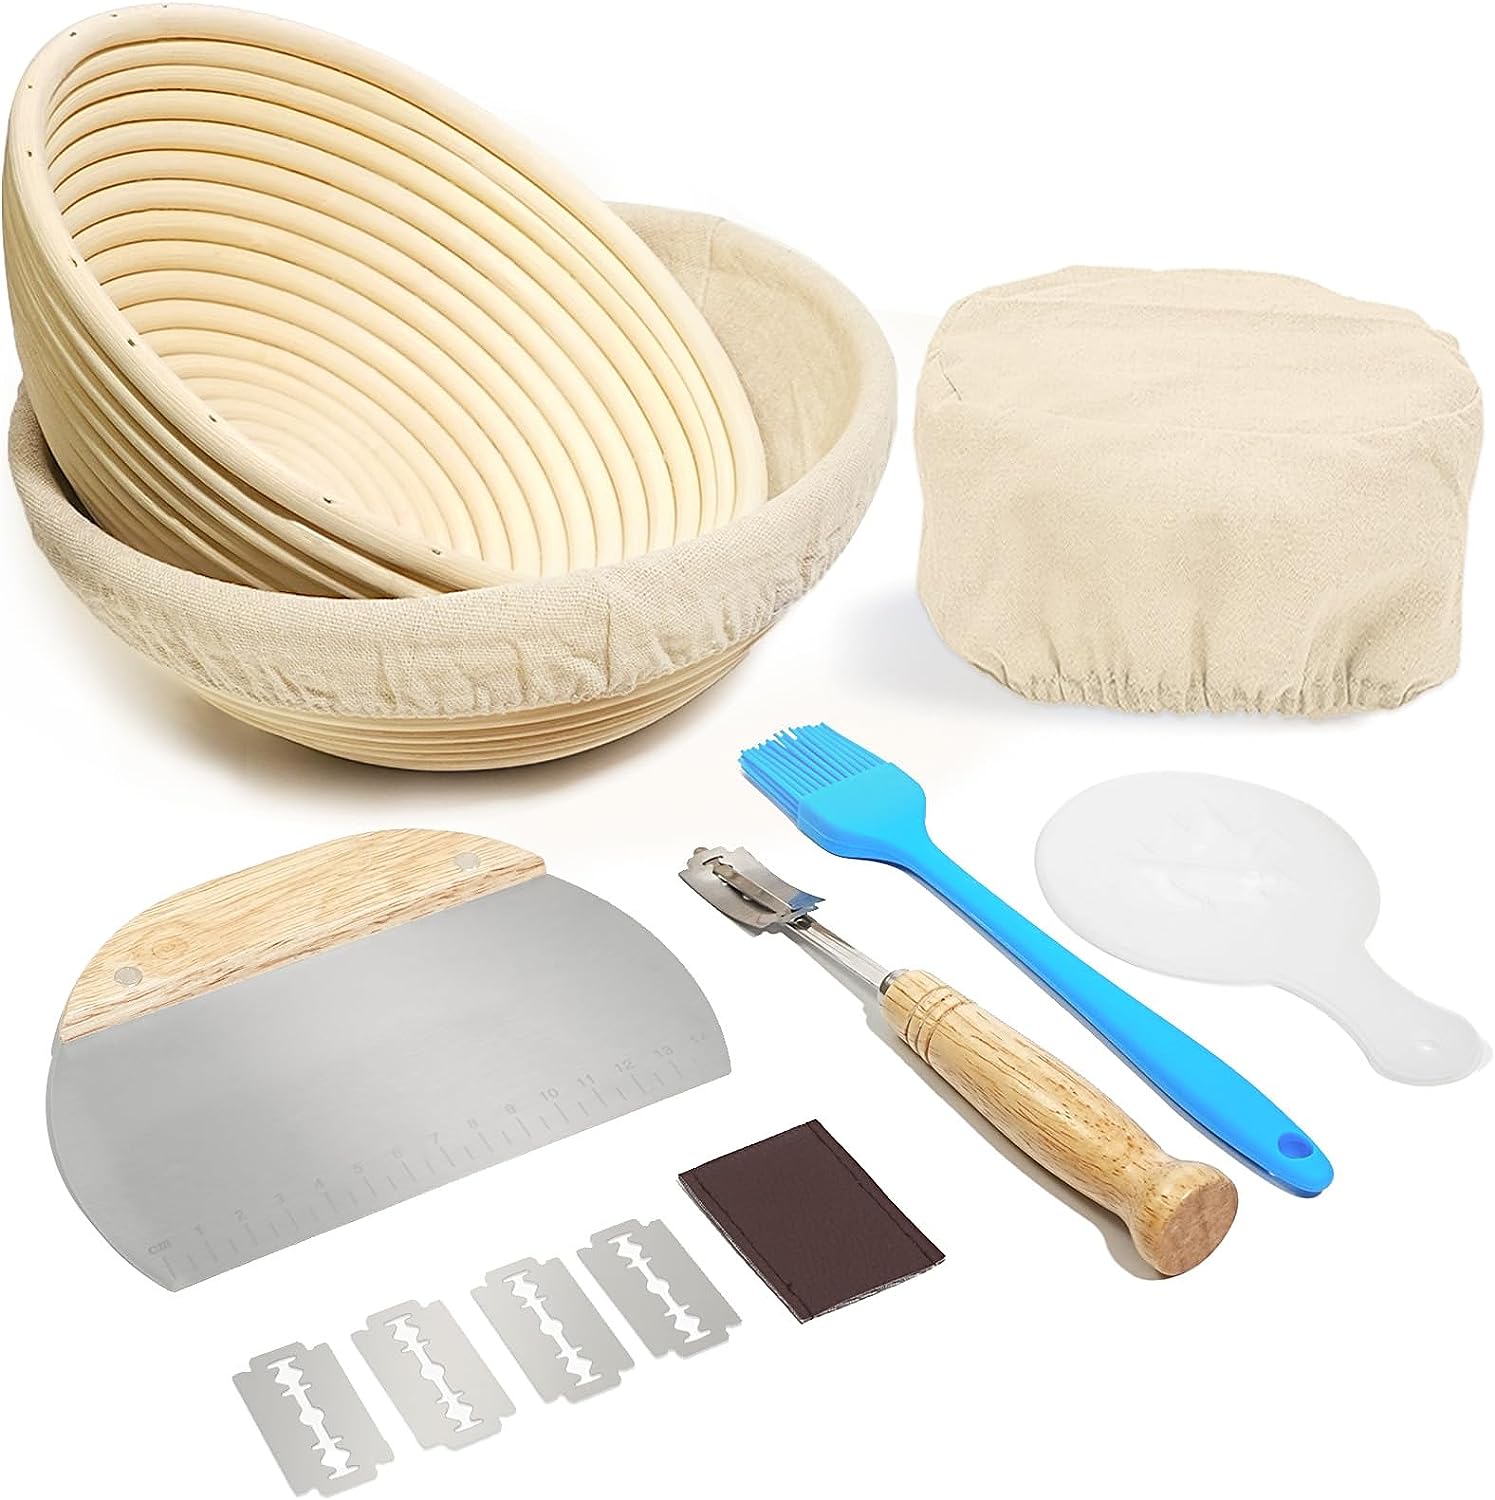 YCQQPRO Silicone Bread Proofing Basket for Sourdough, 9 & 10